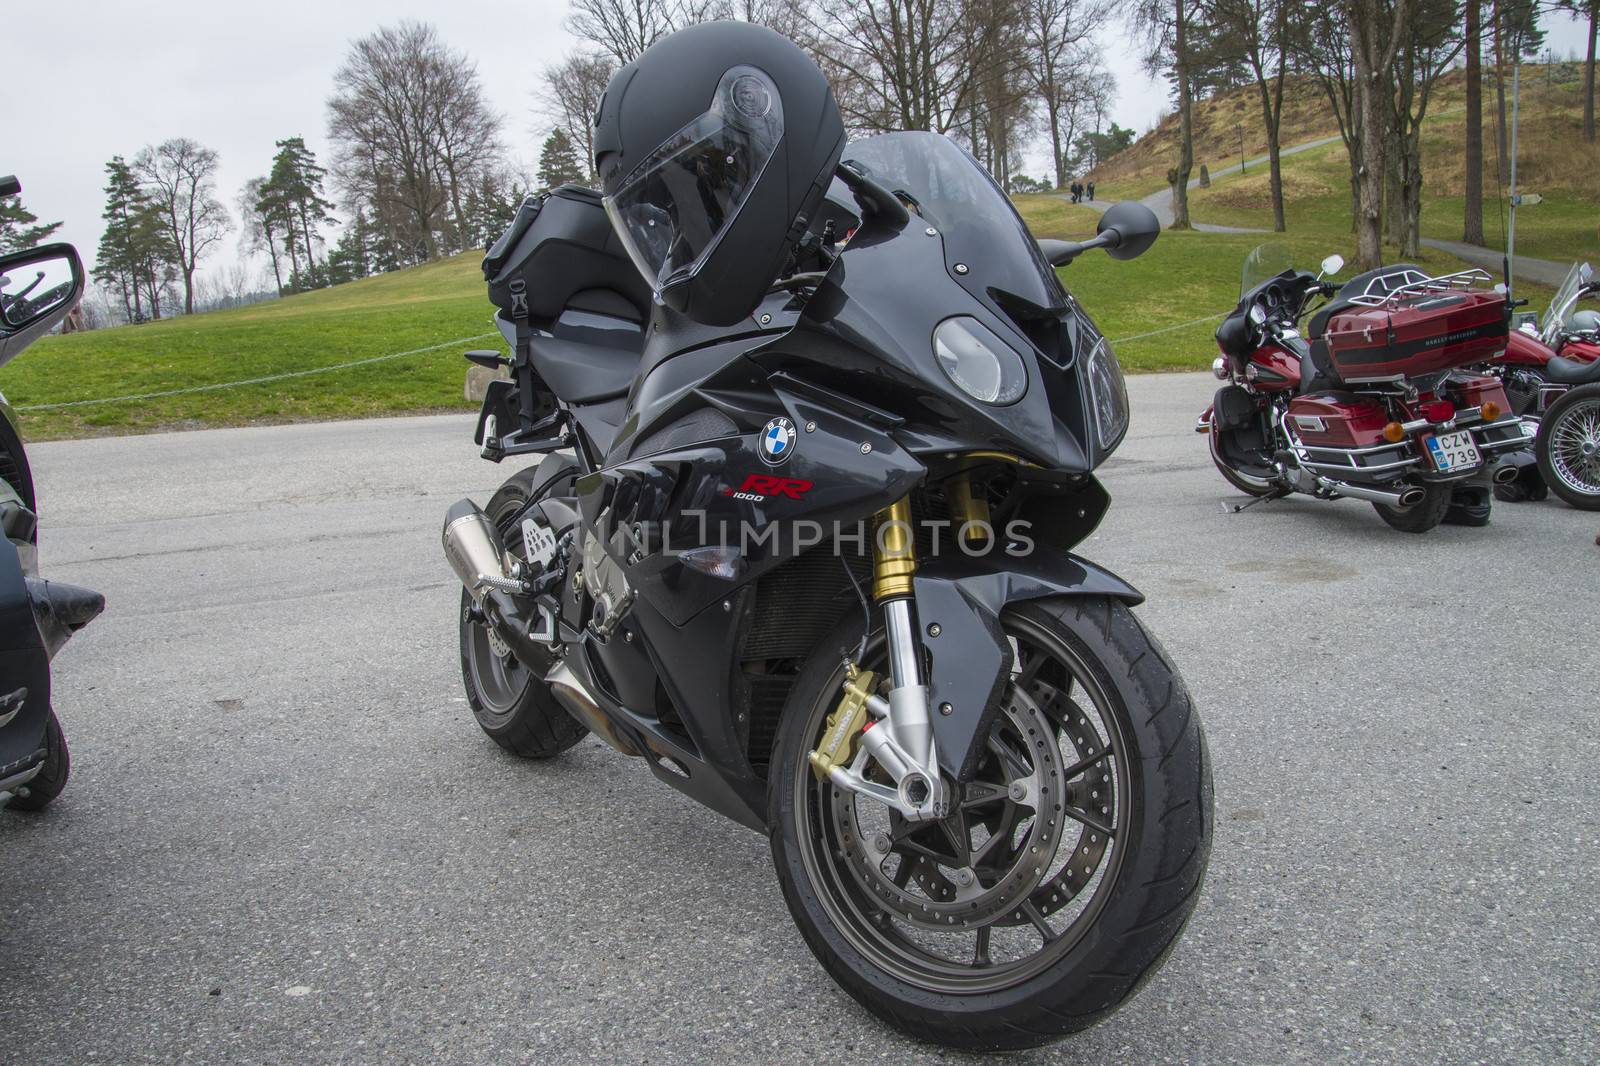 Every year in May there is a motorcycle meeting at Fredriksten fortress in Halden, Norway. In this photo, BMW S1000RR which is a sport bike.